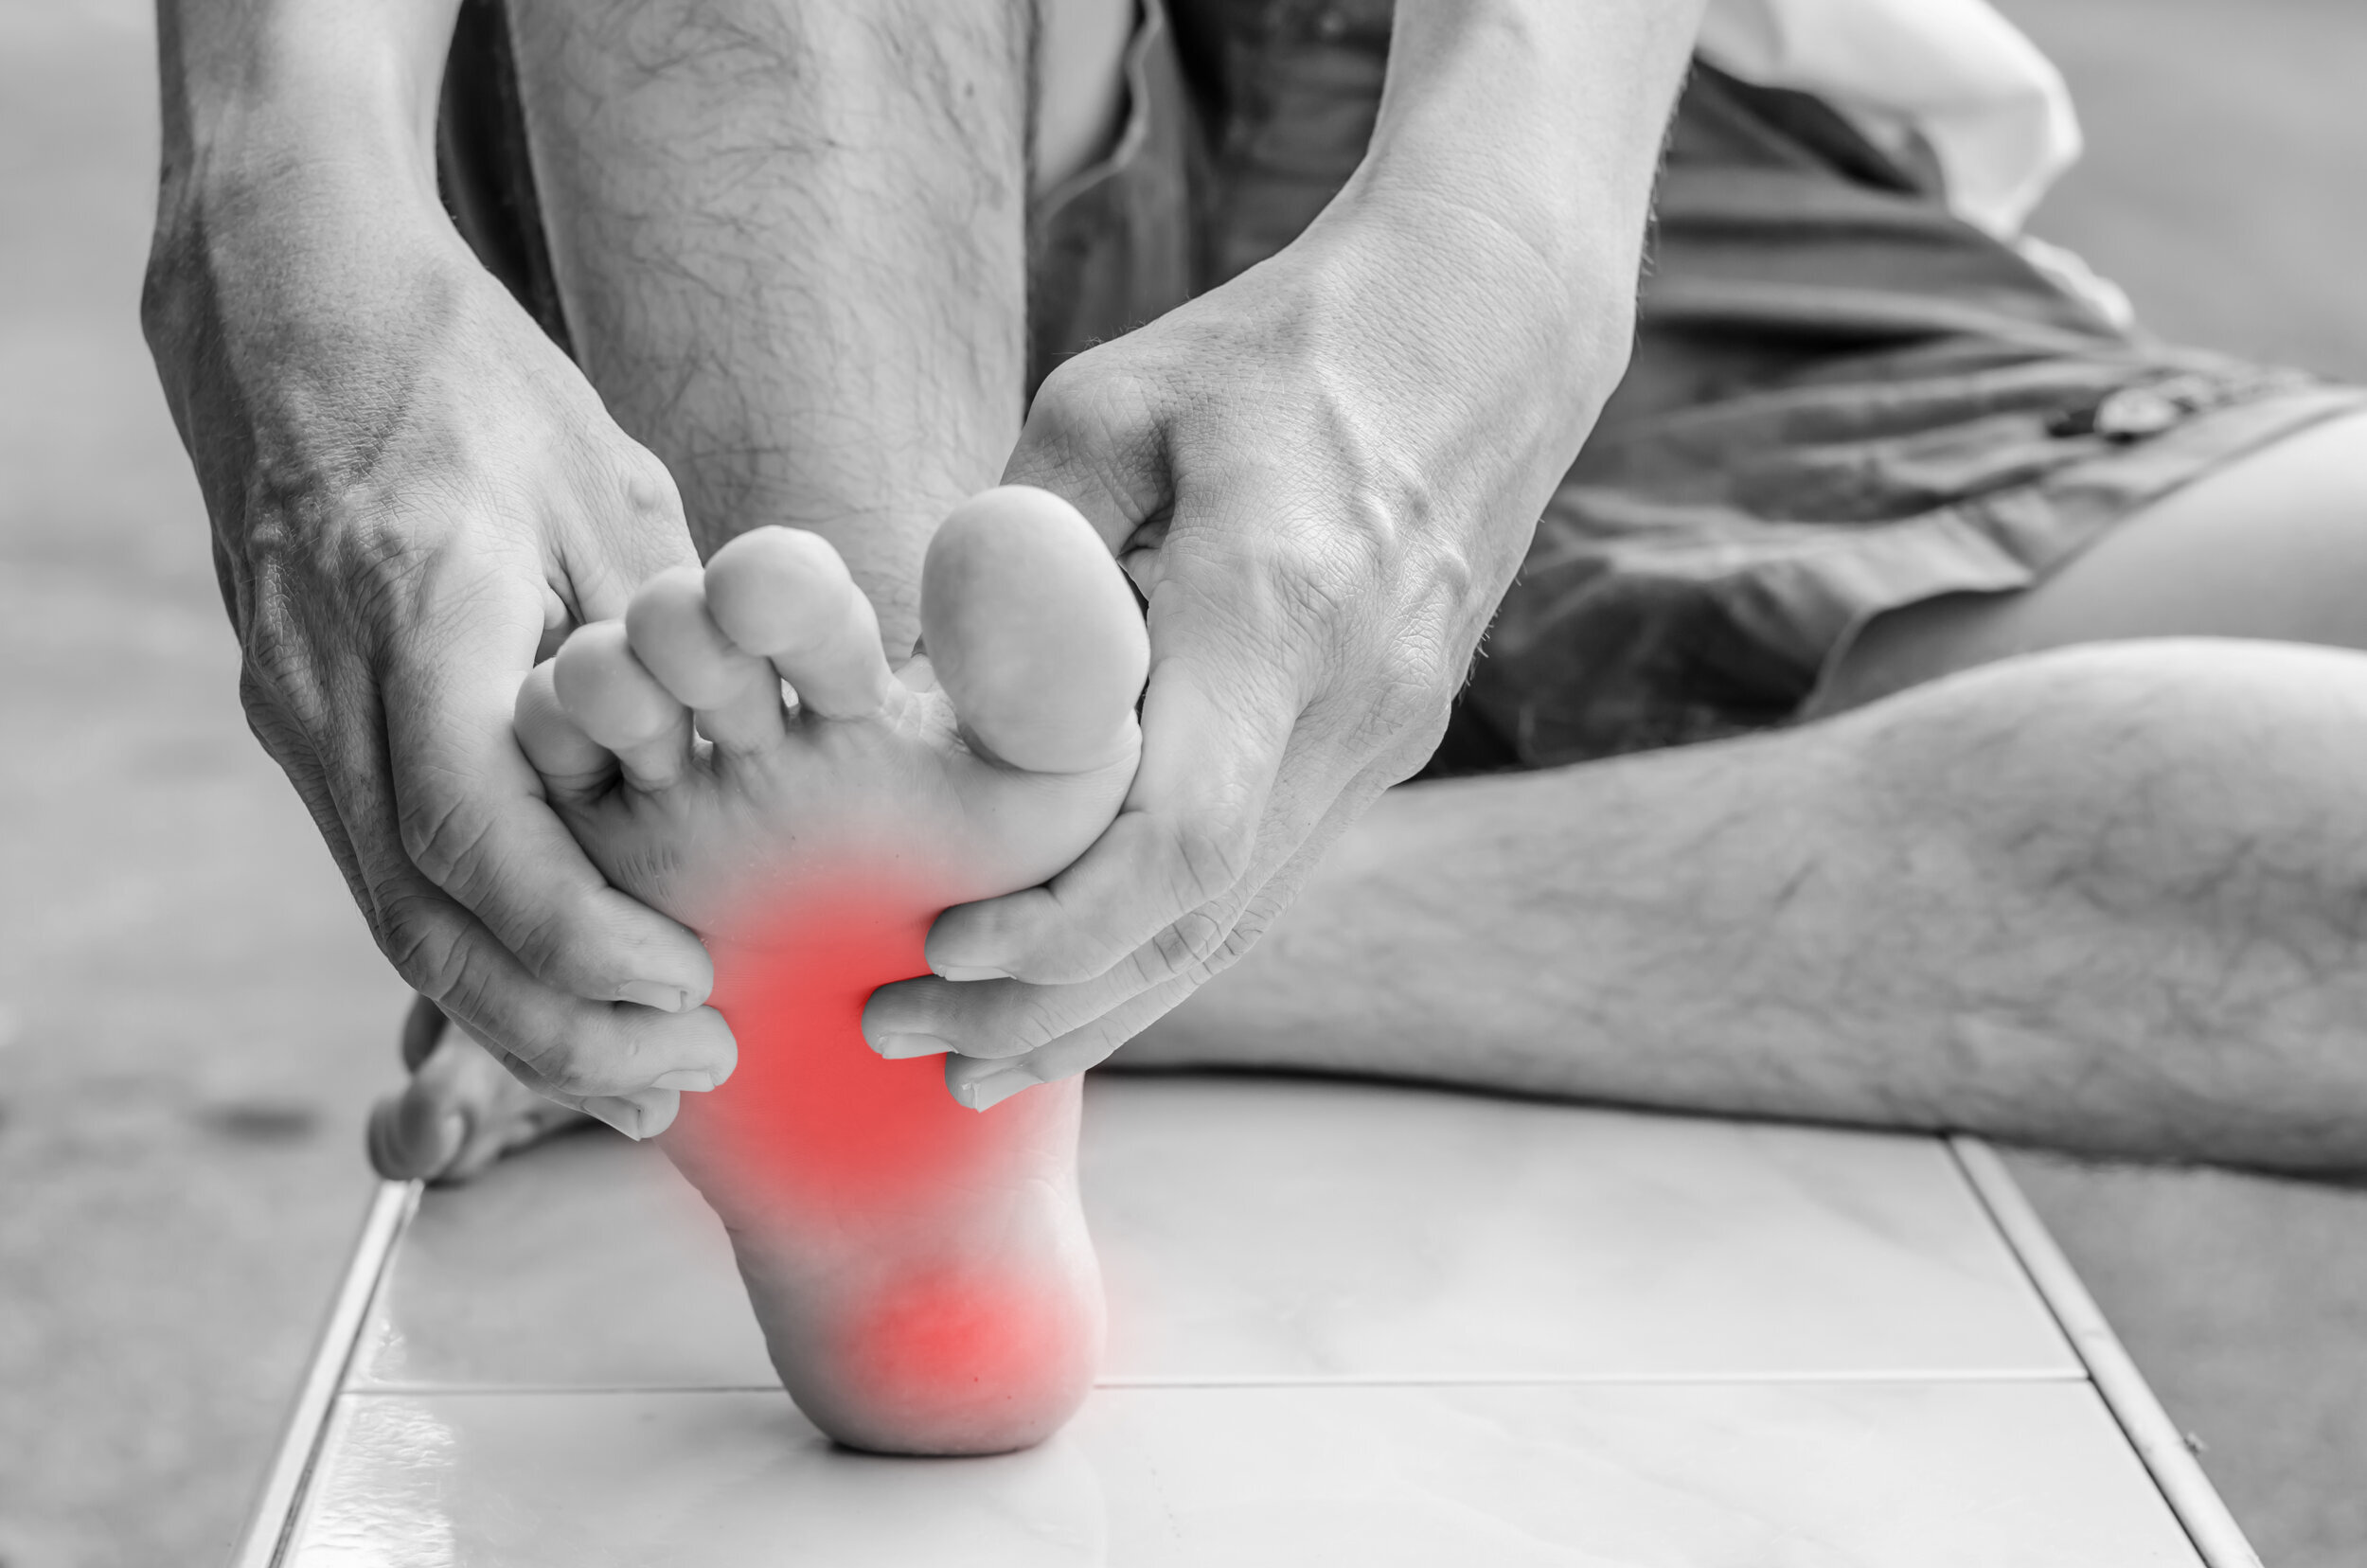 Sharp Pain on the Top of the Foot When Walking: What Causes It?